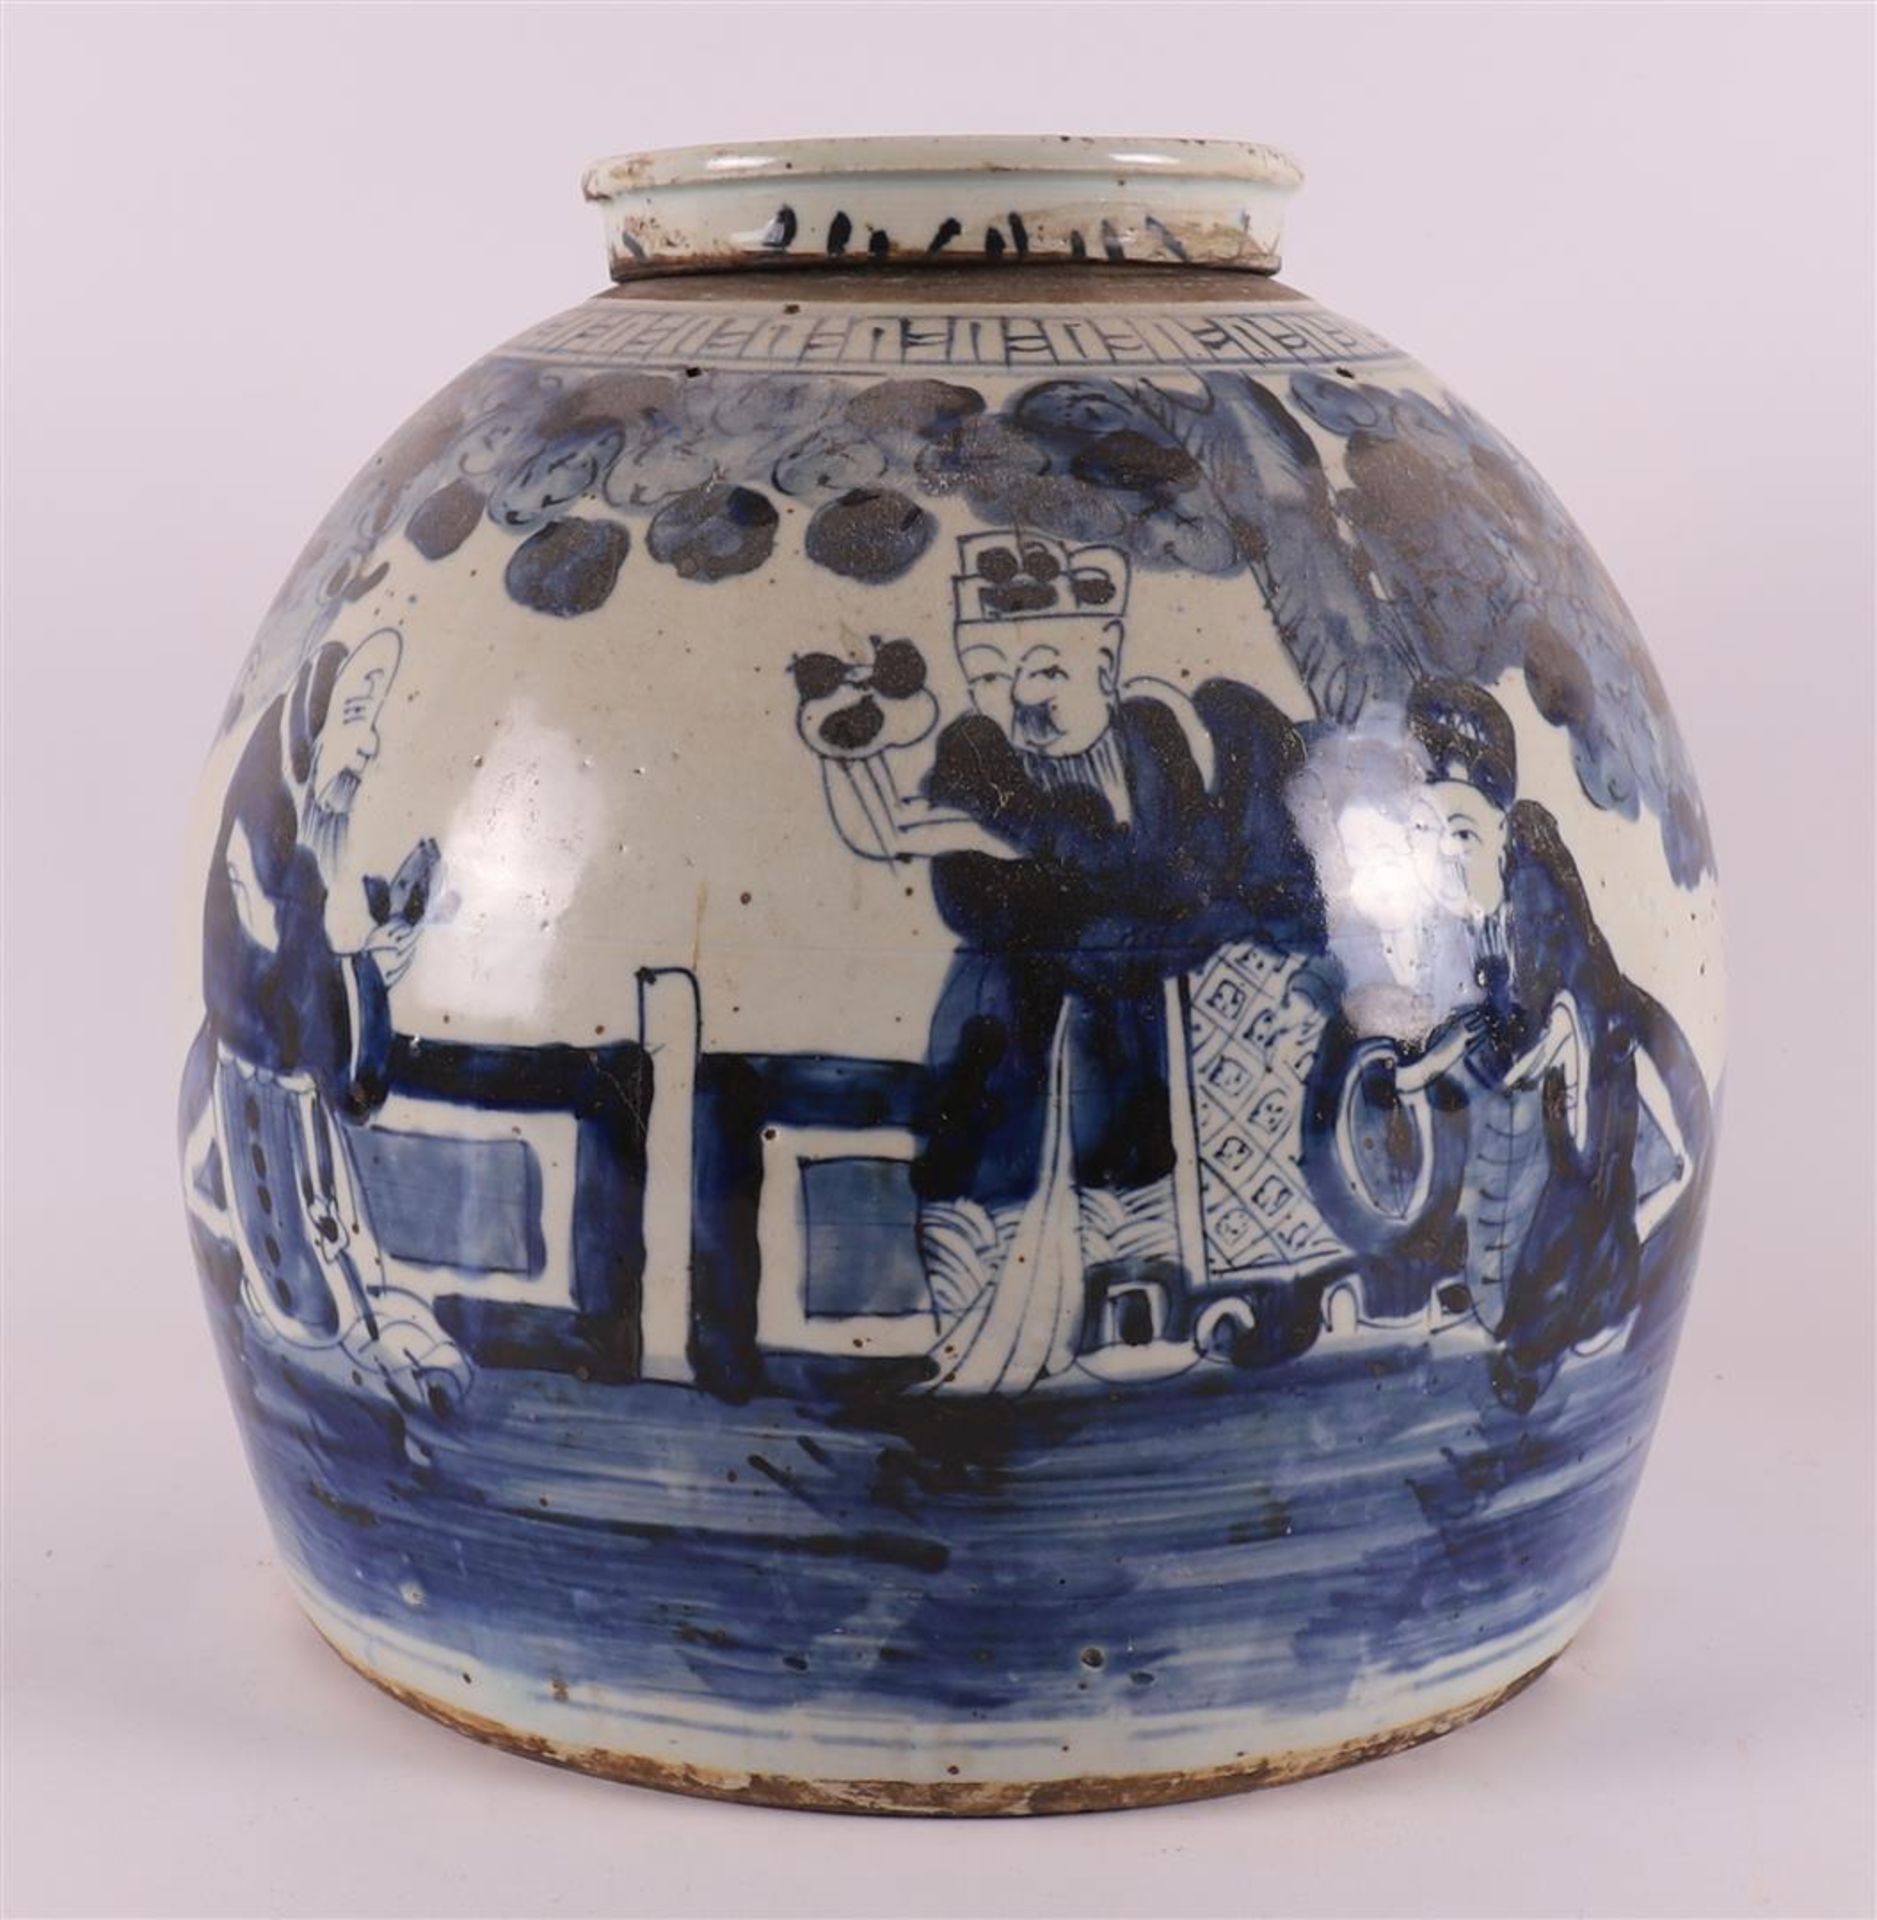 A blue/white porcelain ginger jar with lid, China, 19th century.